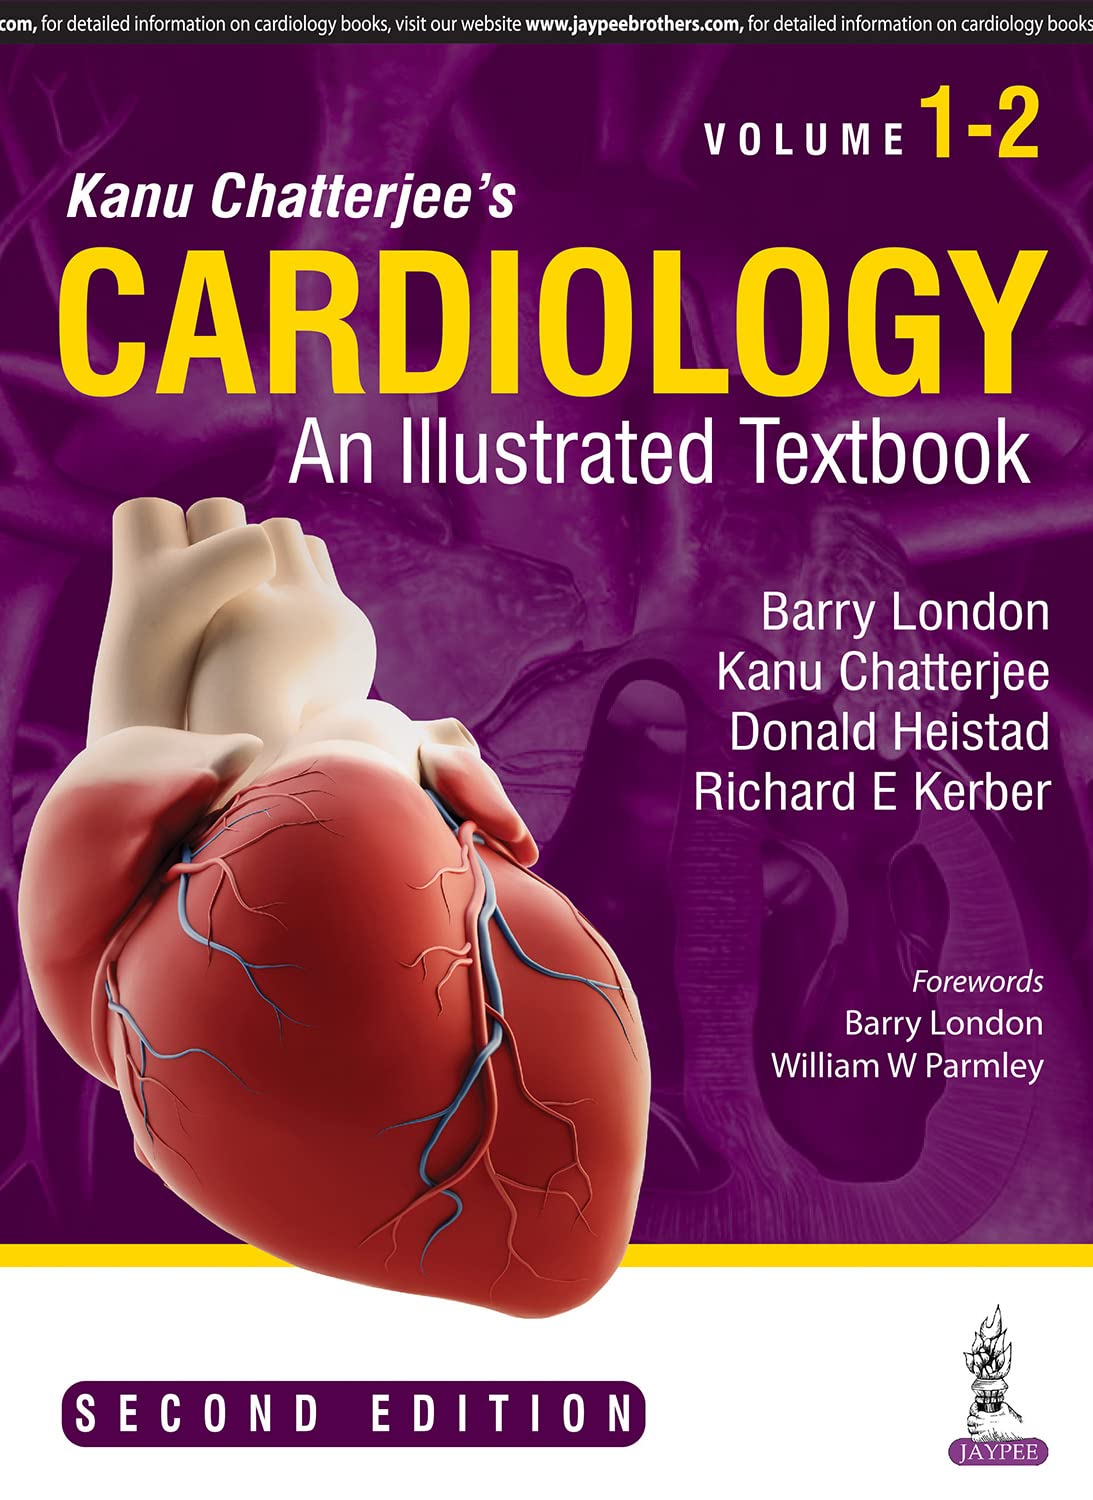 Cardiology - An Illustrated Textbook (2 Volume Set), 2nd Edition 